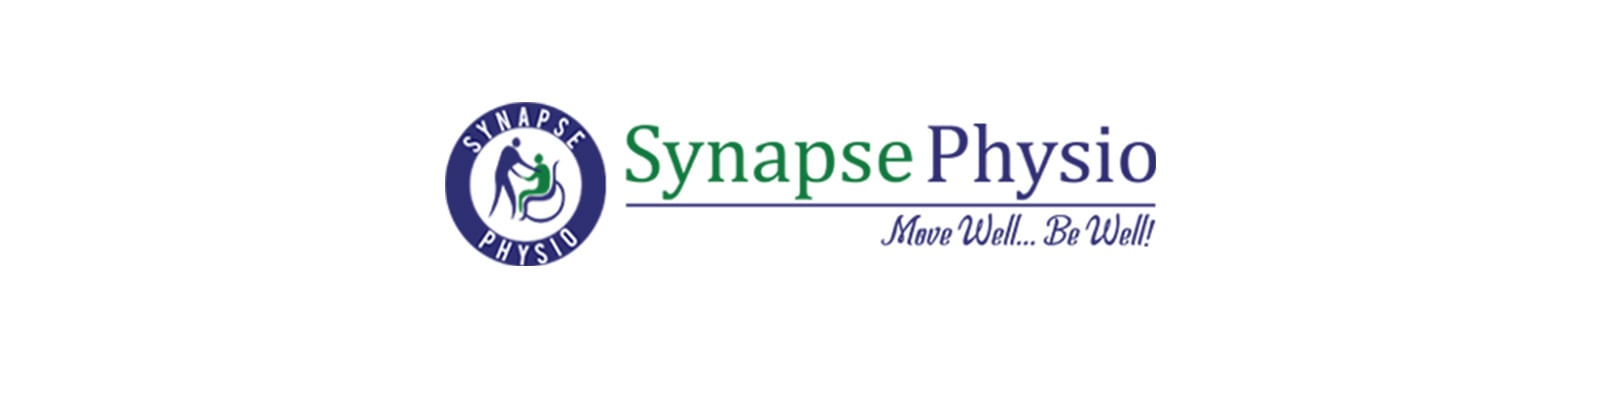 Synapse Physio At ( Fortis City Centre, Chandigarh )